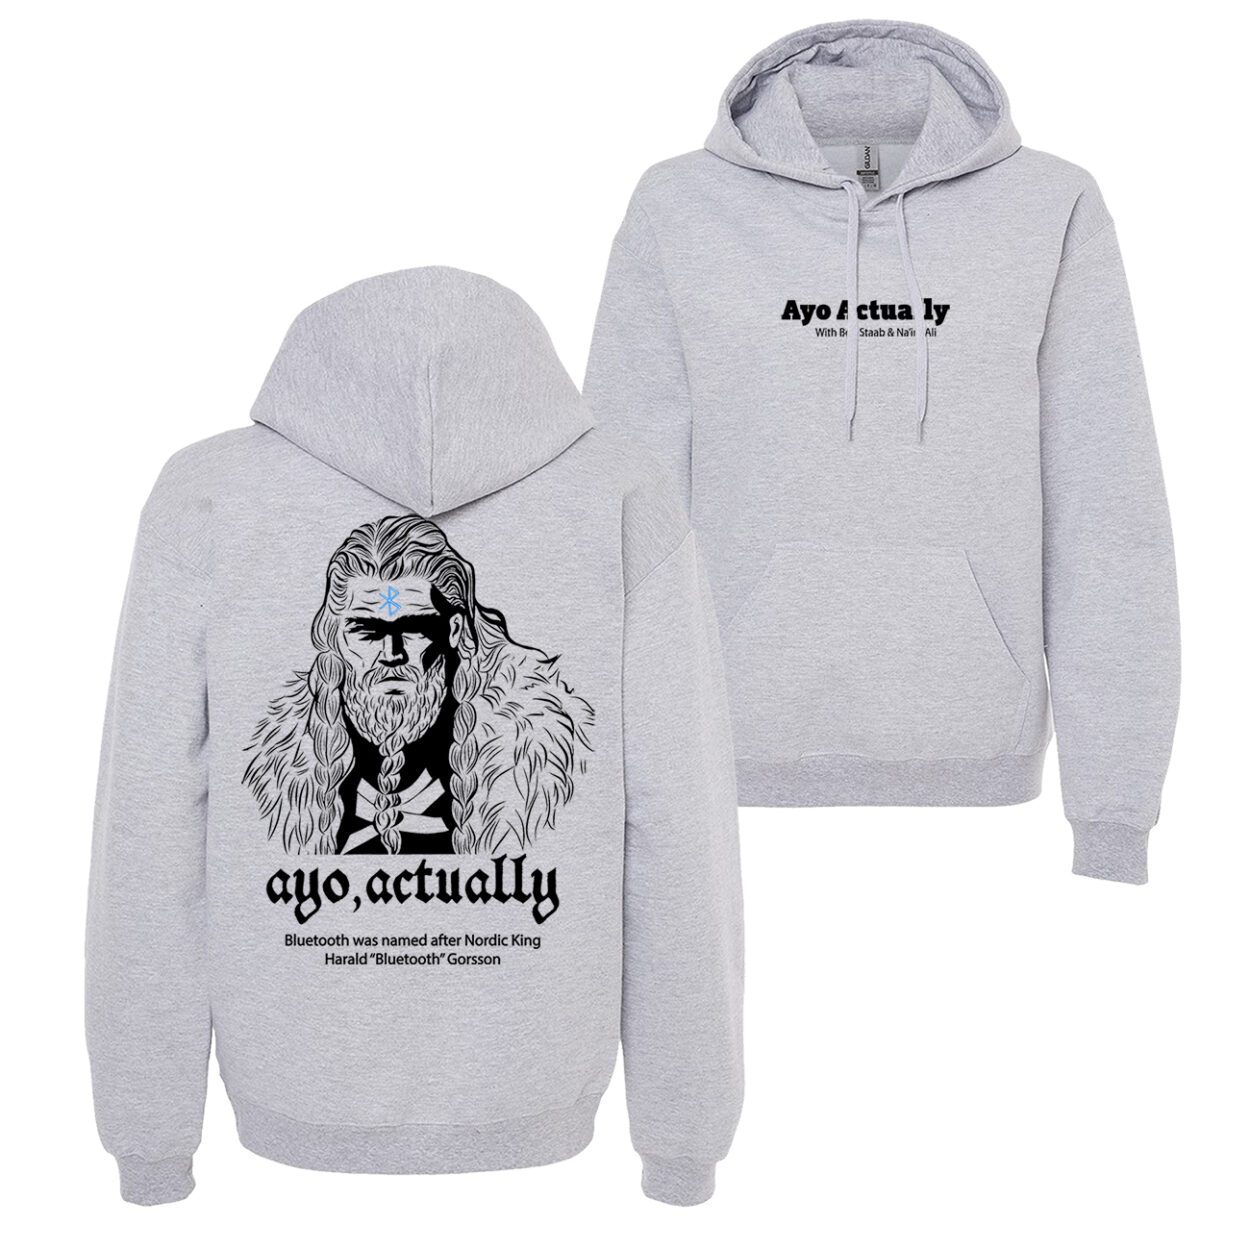 Bluetooth sport grey Ayo Actually Hoodie PODCAST MERCH